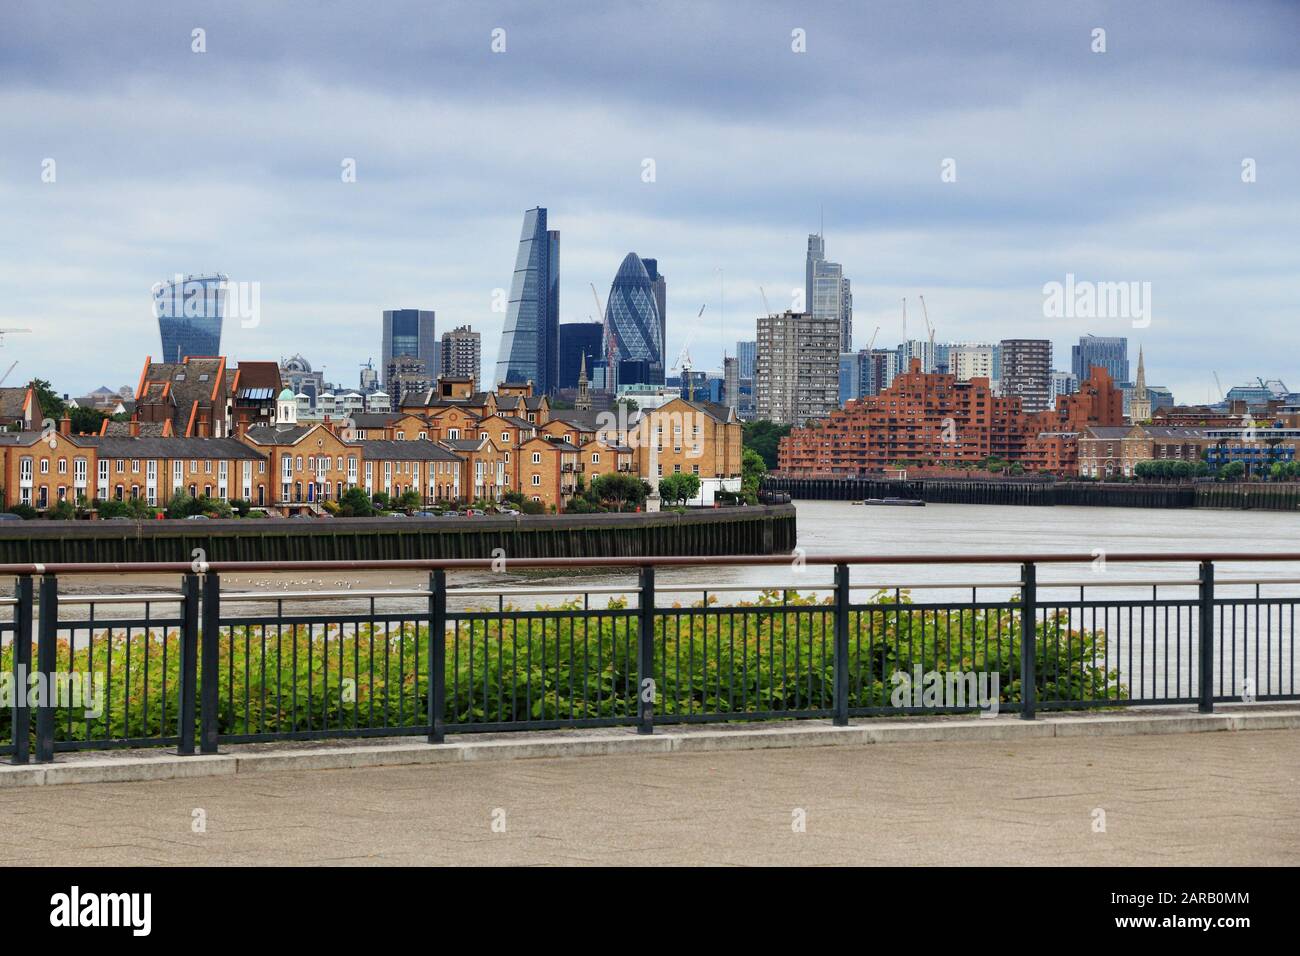 City of London skyline - capital city of the UK. Seen from Canary Wharf. Stock Photo